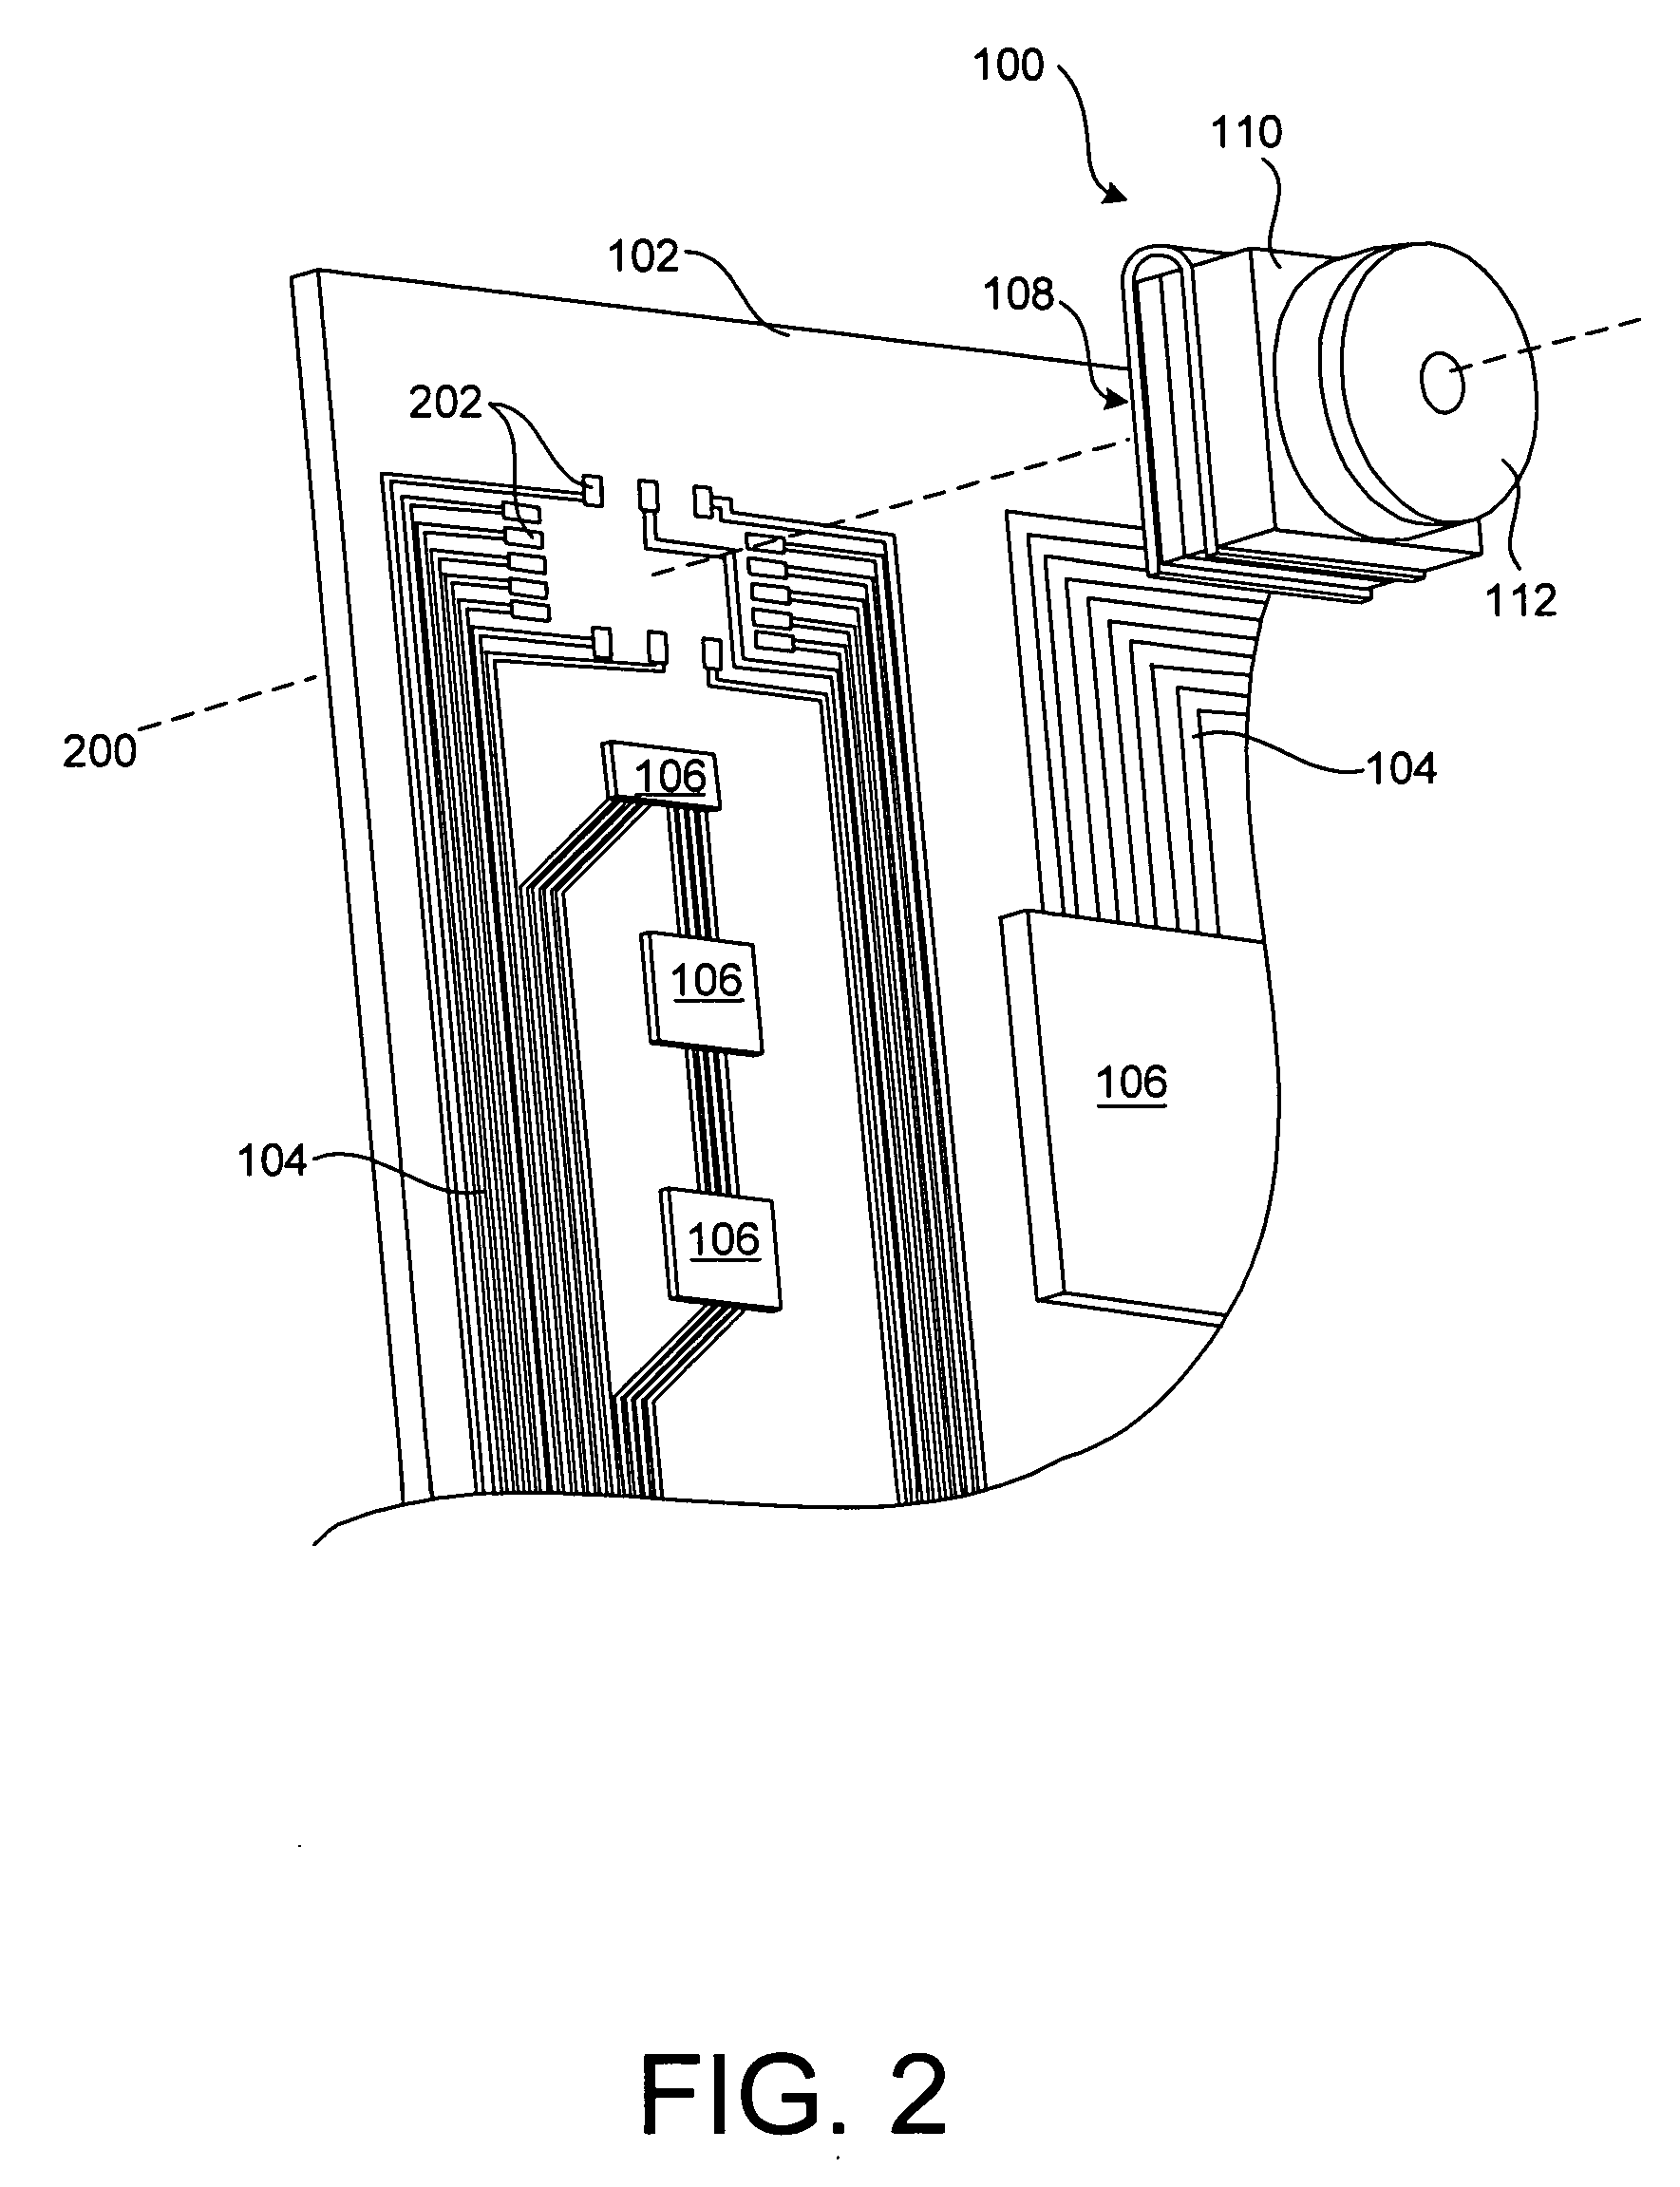 Folded package camera module and method of manufacture